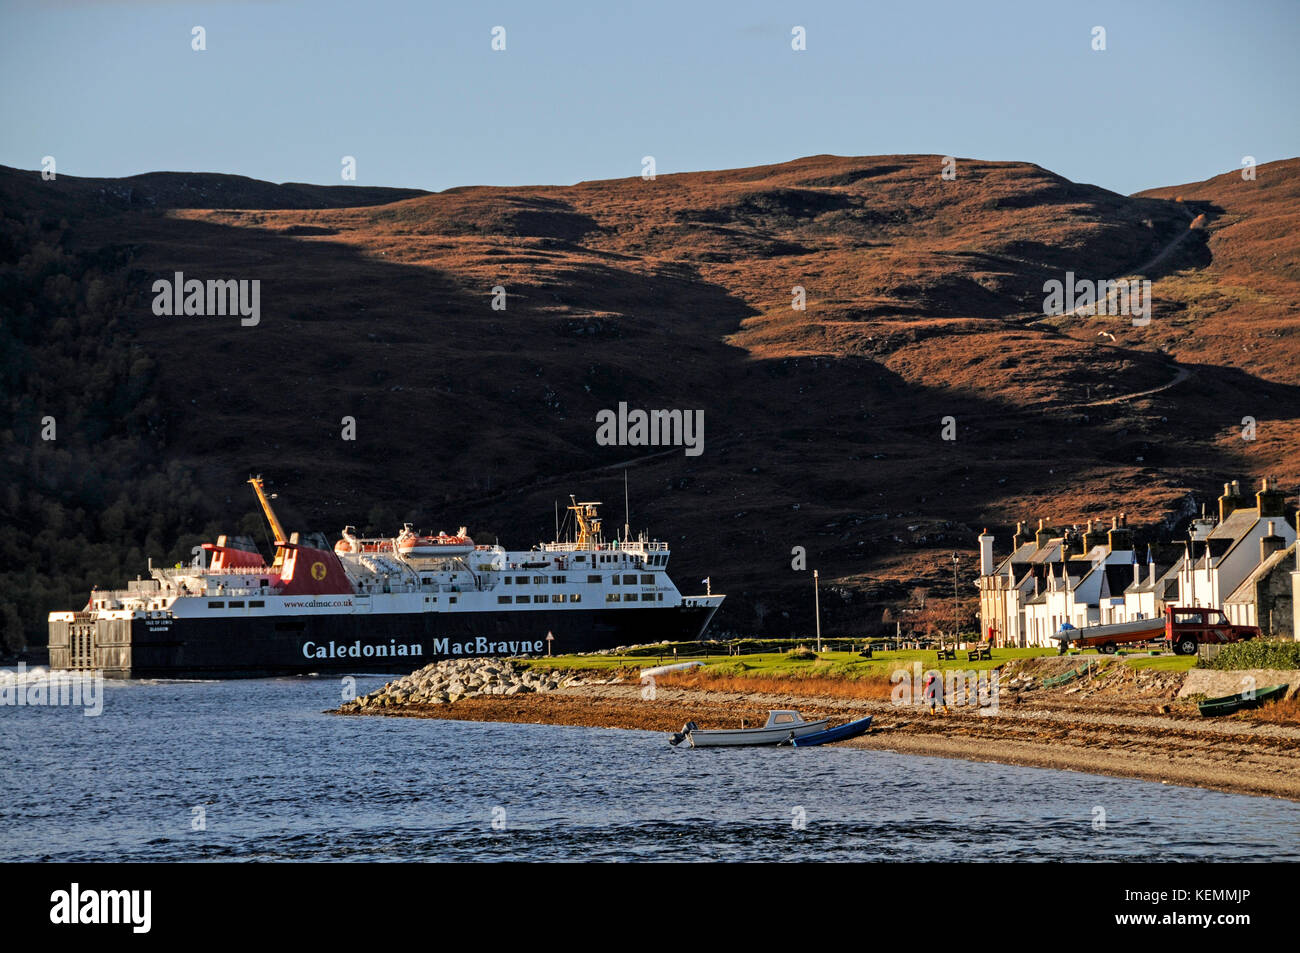 The daily Caledonian MacBrayne car ferry service sails from Ullapool on Loch Broom  to Stornoway in the Western Isles, Scotland. Stock Photo